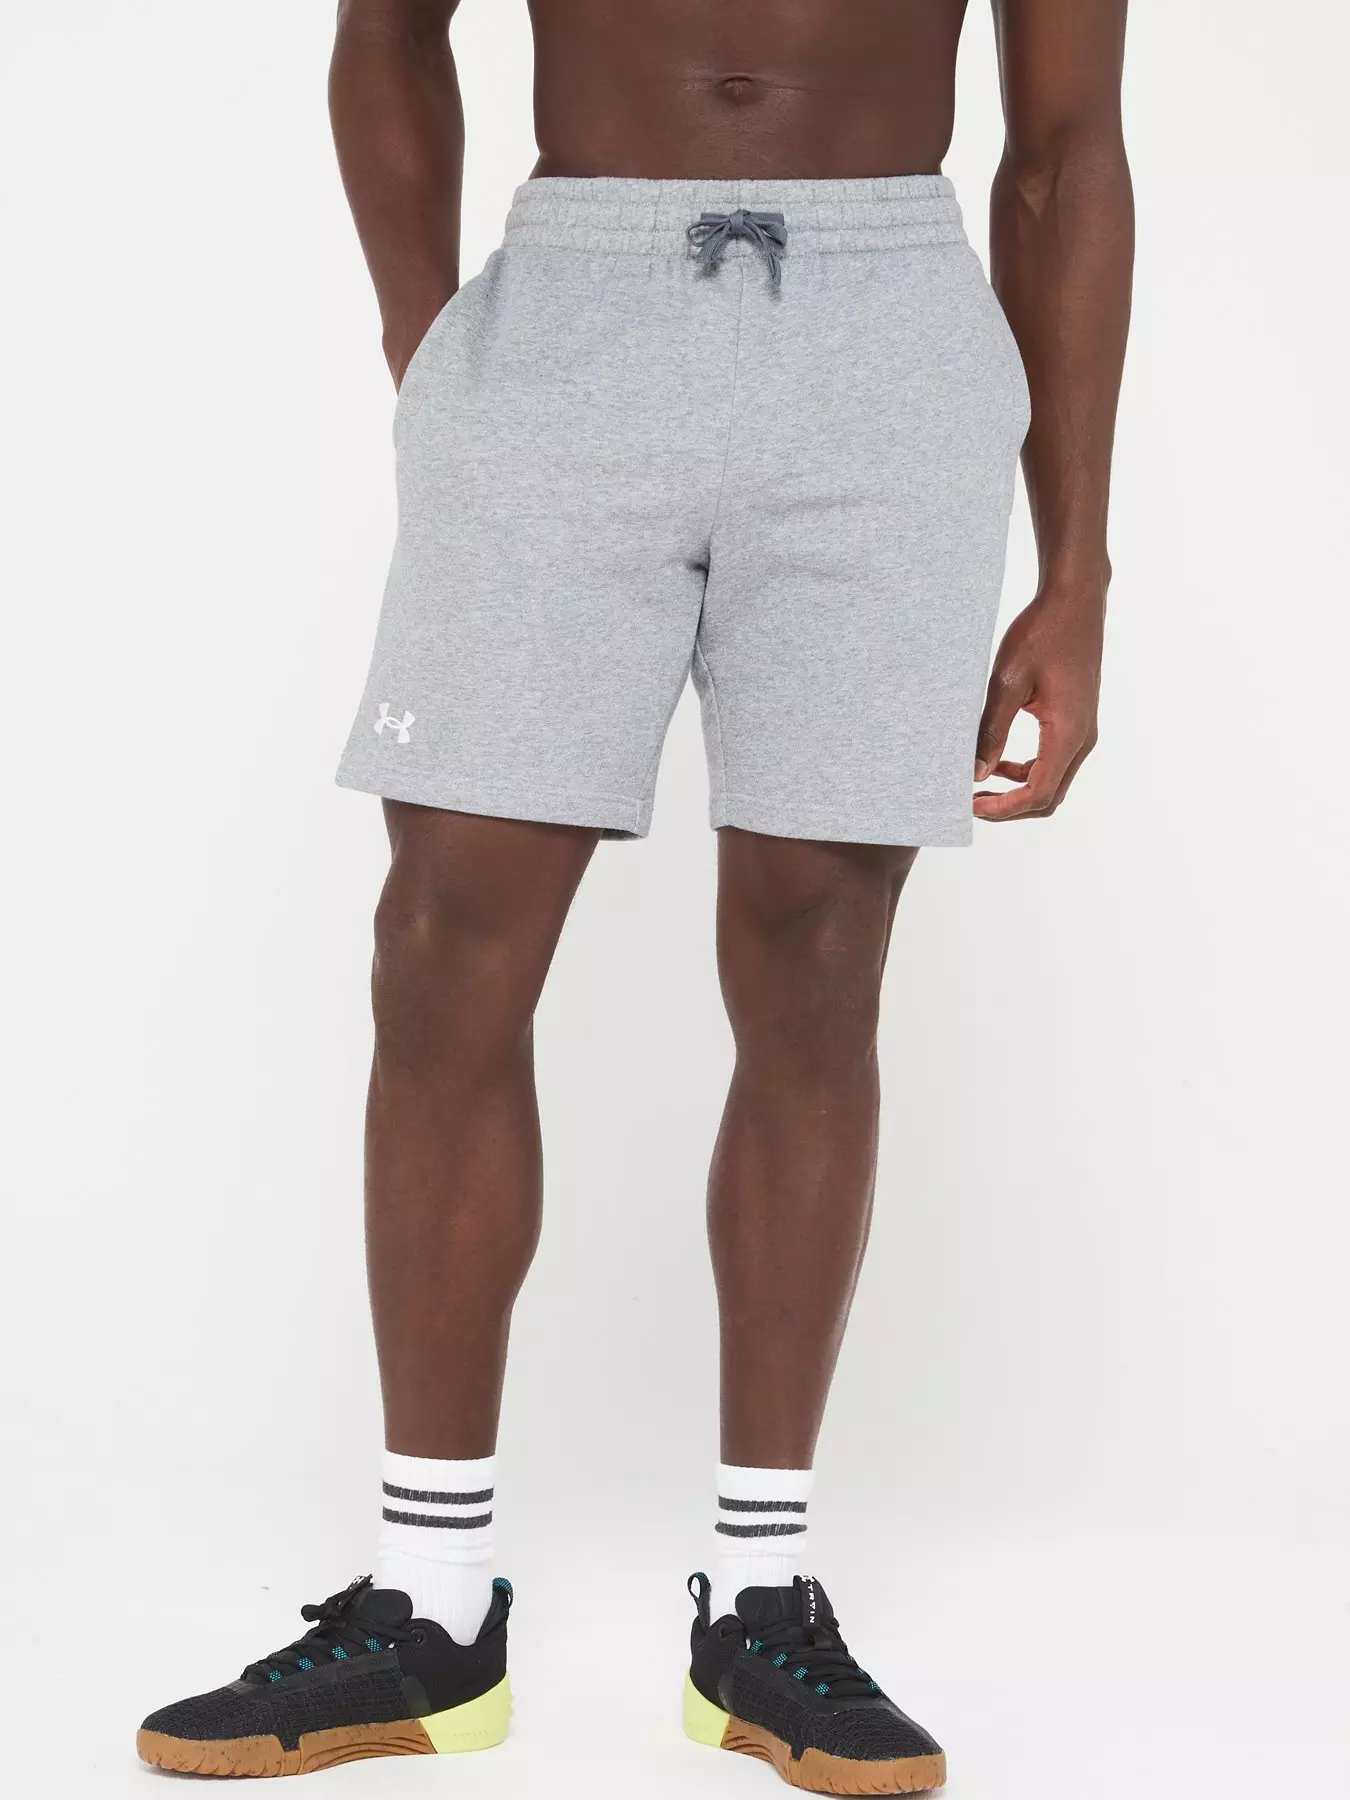 Under armour, Shorts, Mens sports clothing